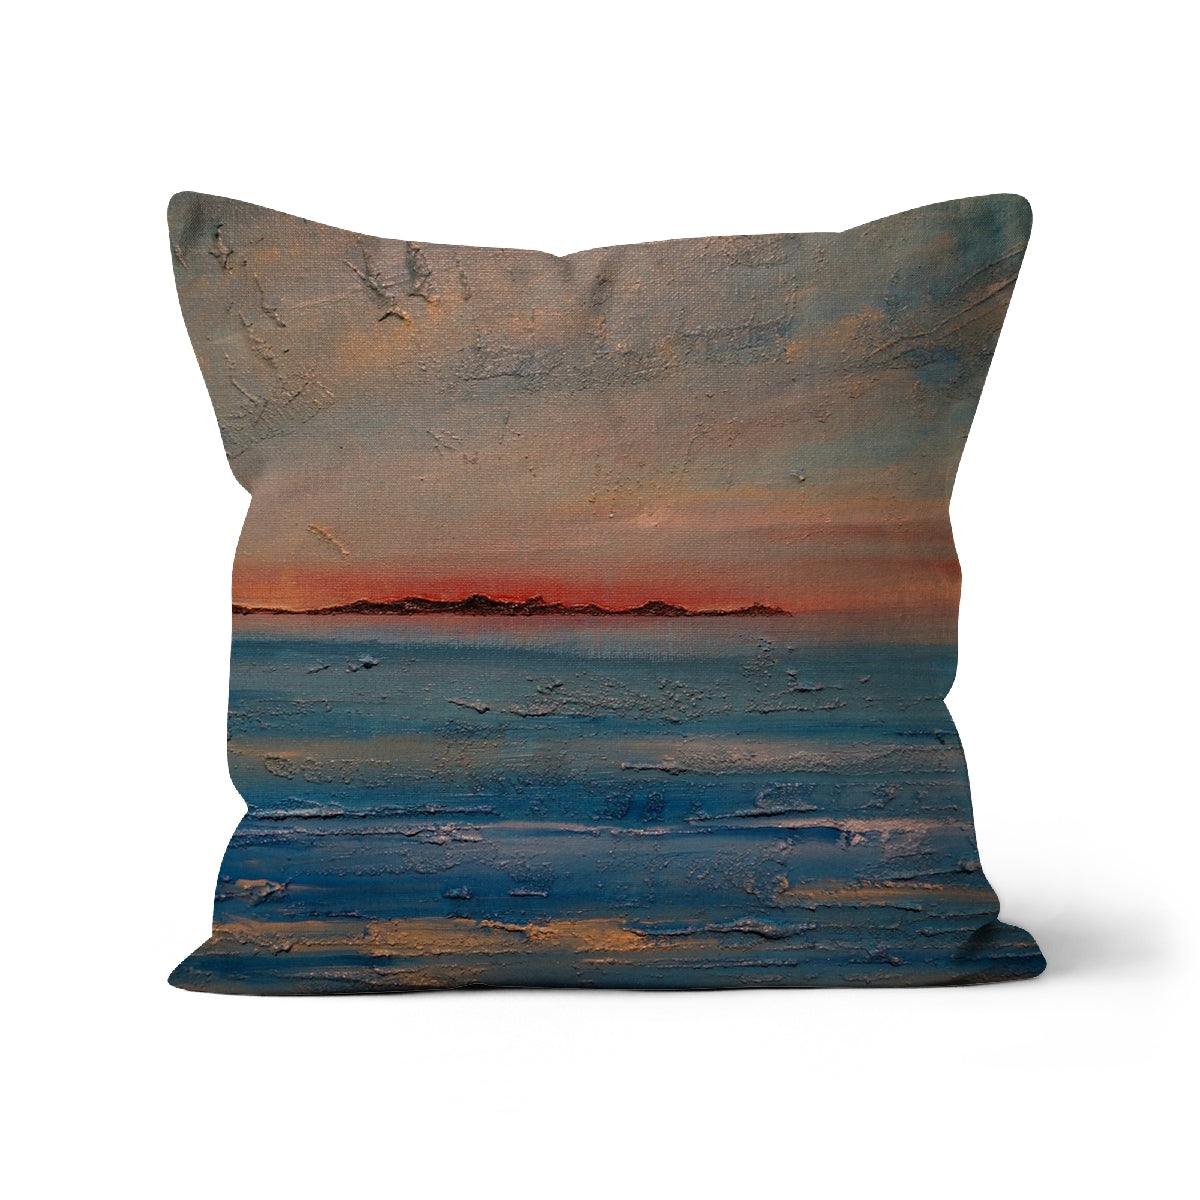 Gigha Sunset Art Gifts Cushion-Cushions-Hebridean Islands Art Gallery-Linen-24"x24"-Paintings, Prints, Homeware, Art Gifts From Scotland By Scottish Artist Kevin Hunter